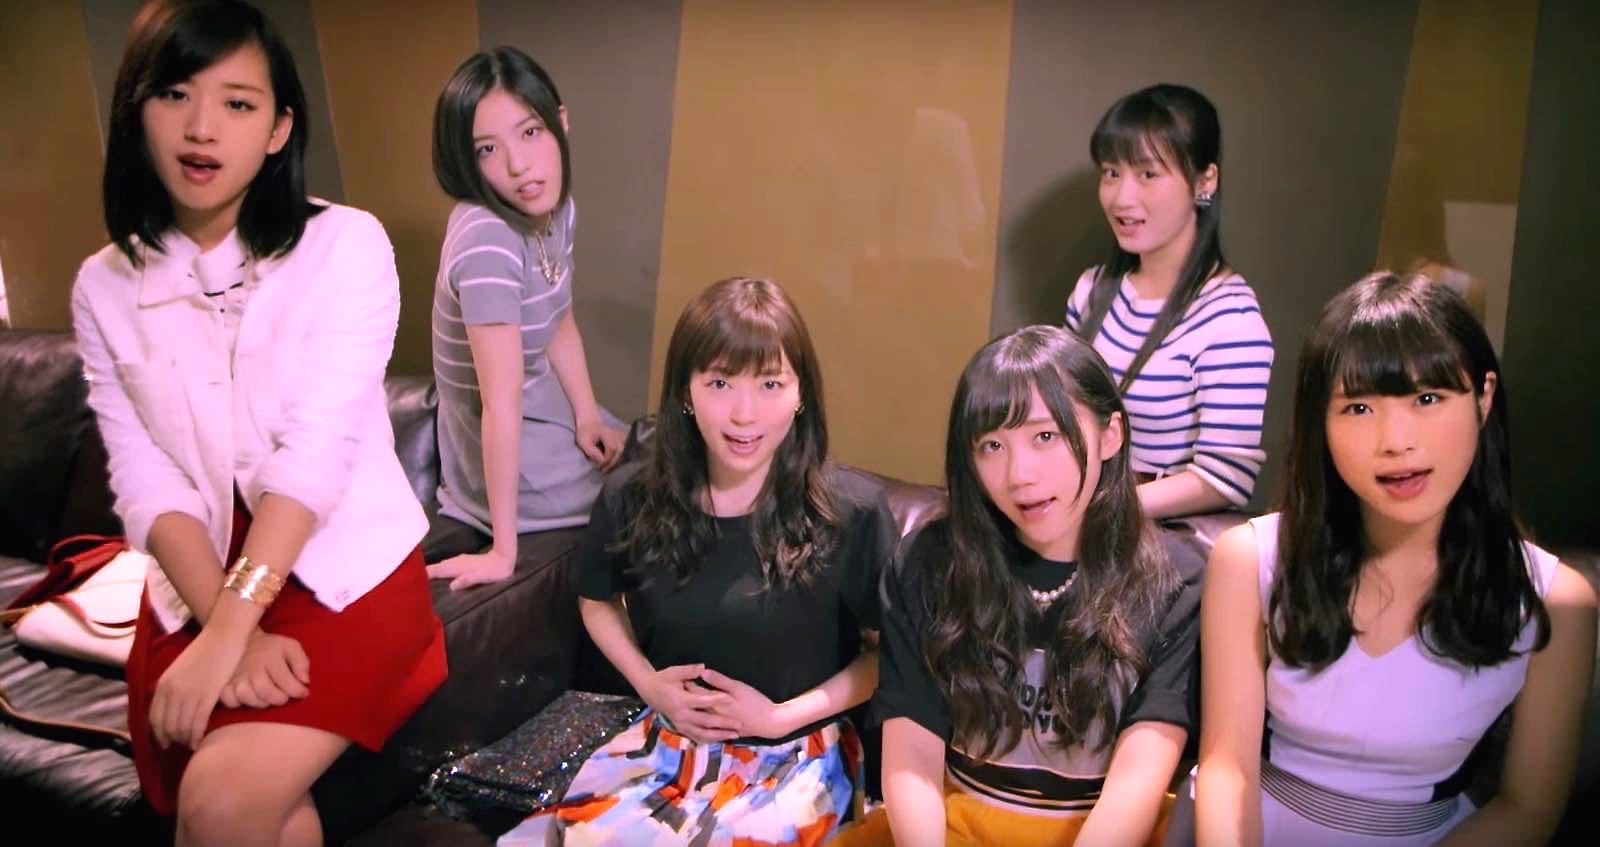 Aliens! Pancakes! Vintage Fashion! Terrible Dates? NMB48 Releases More MVs From 13th Single!